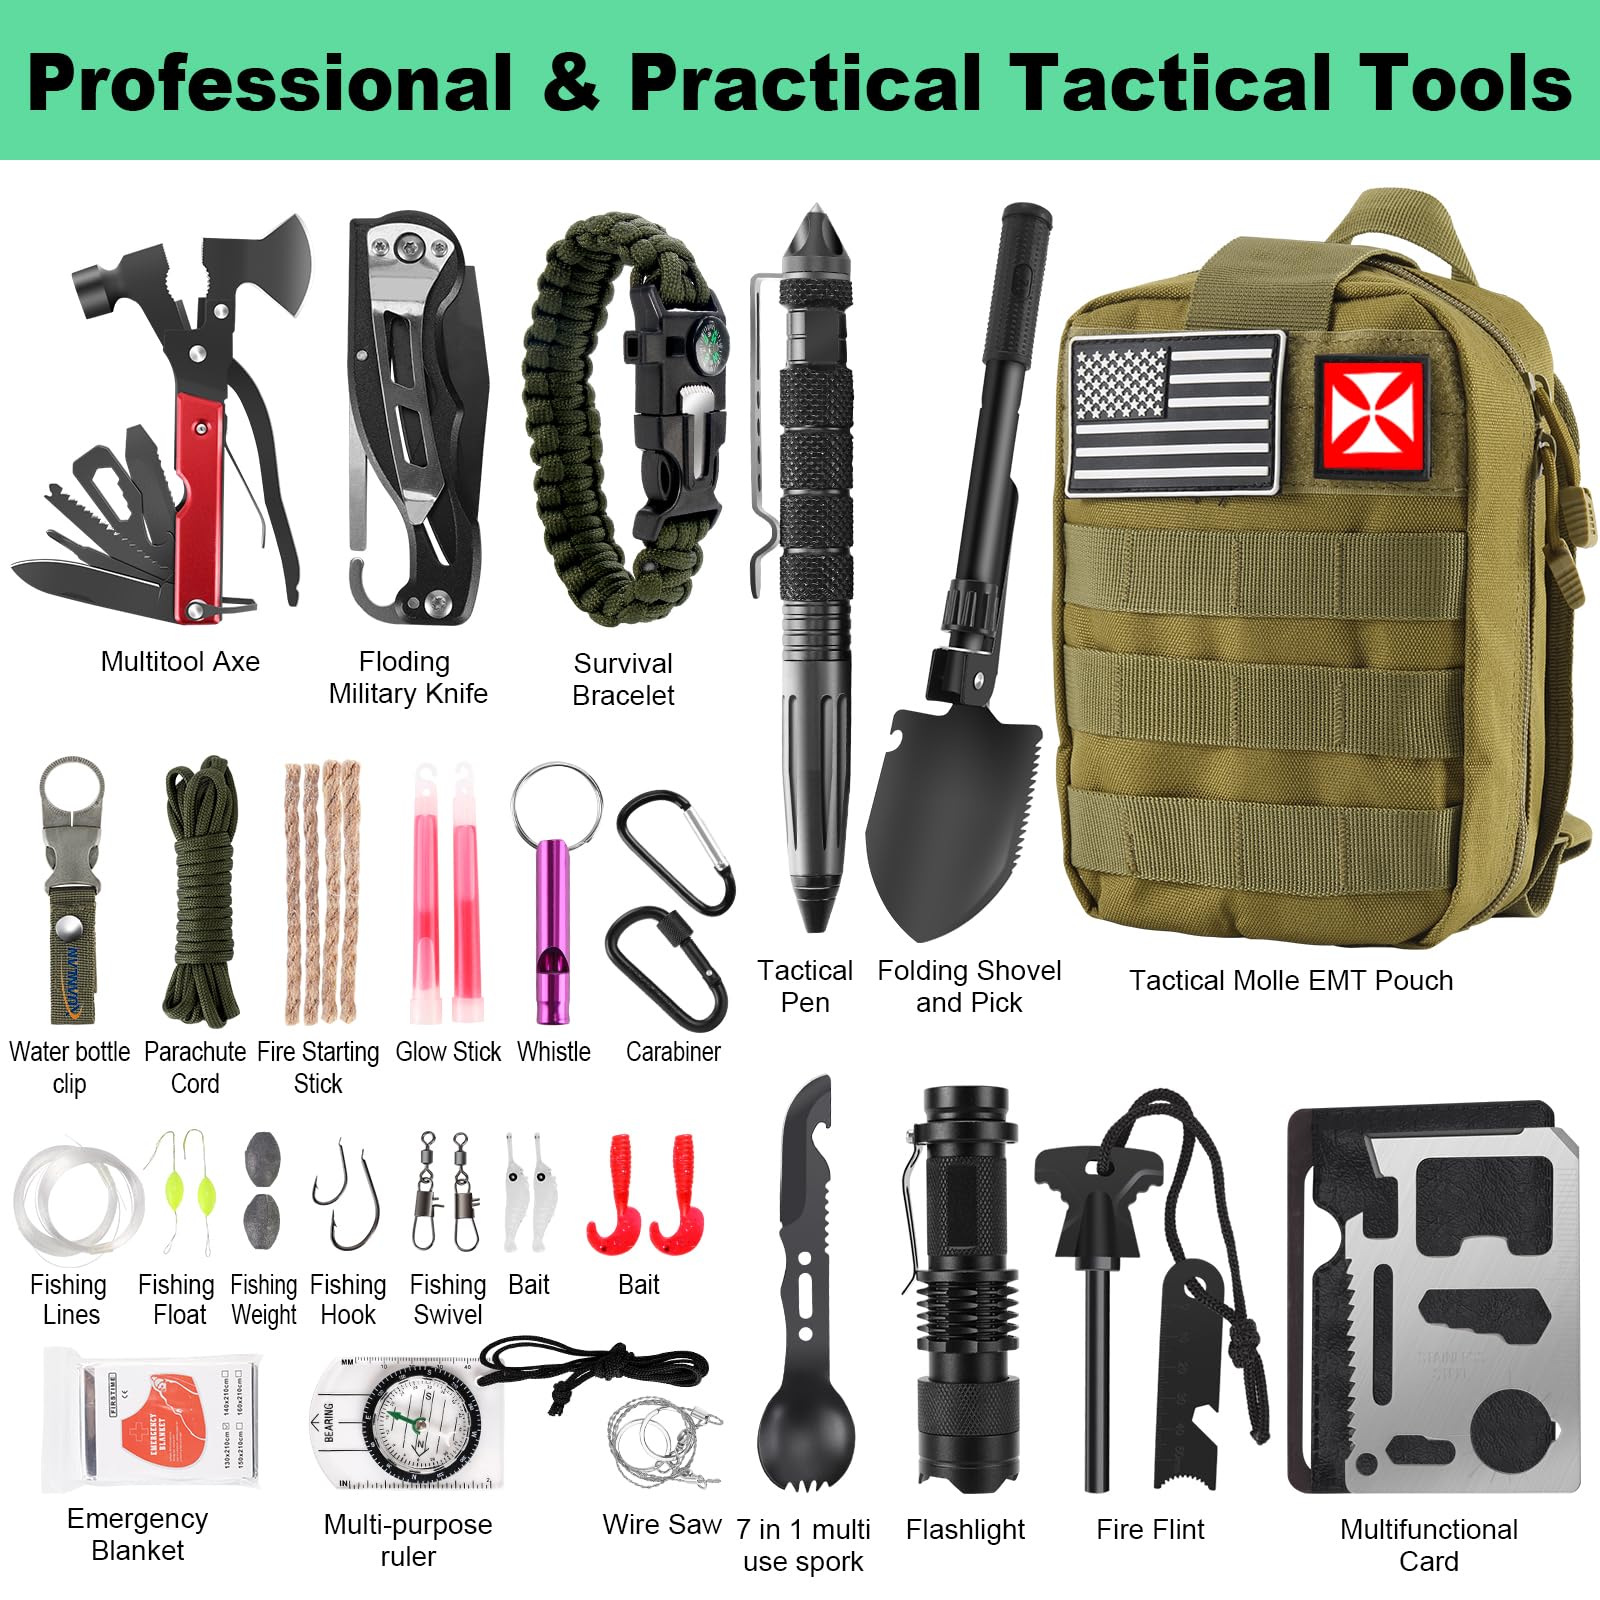 Survival Kit 256 in 1, First Aid Kit Survival Gear Tools Trauma Kit with Molle Pouch for Outdoor, Camping, Hunting, Hiking, Earthquake, Home, Office, Gifts for Men Dad Husband Women (Green)